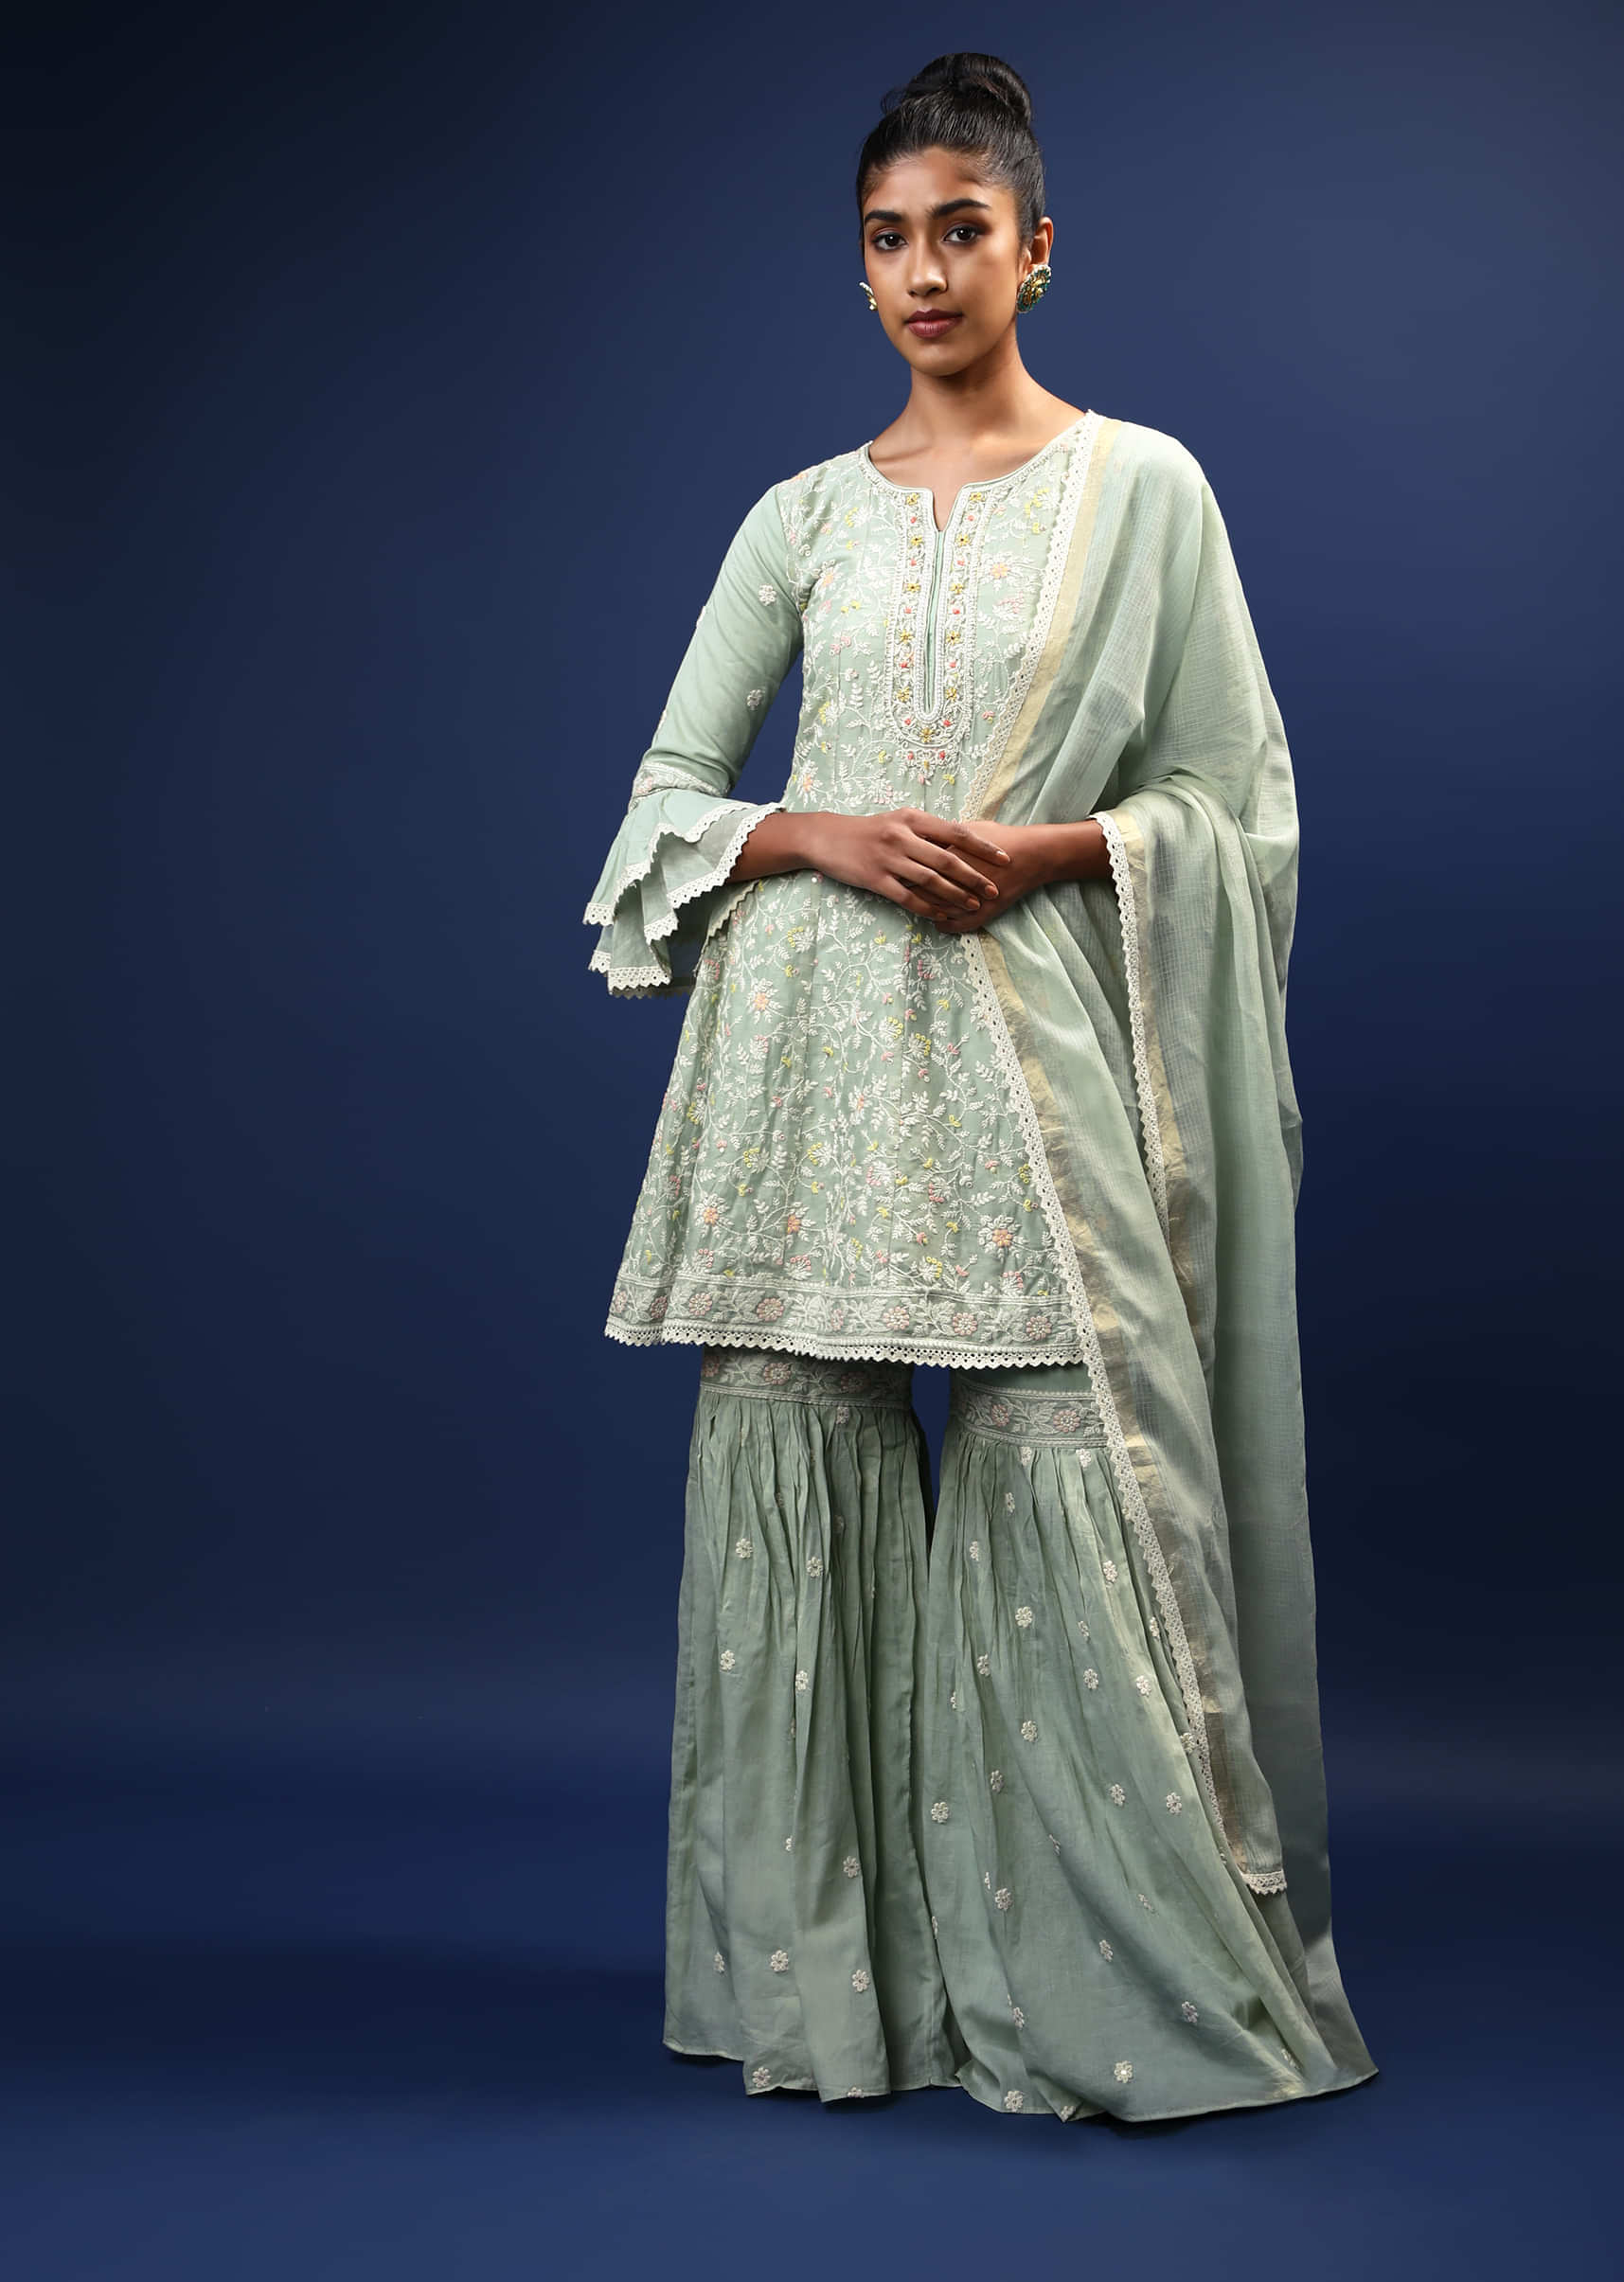 Pastel Green Sharara Peplum Suit In Cotton With Pastel And White Thread Embroidered Floral Motifs And Ruffle Sleeves  